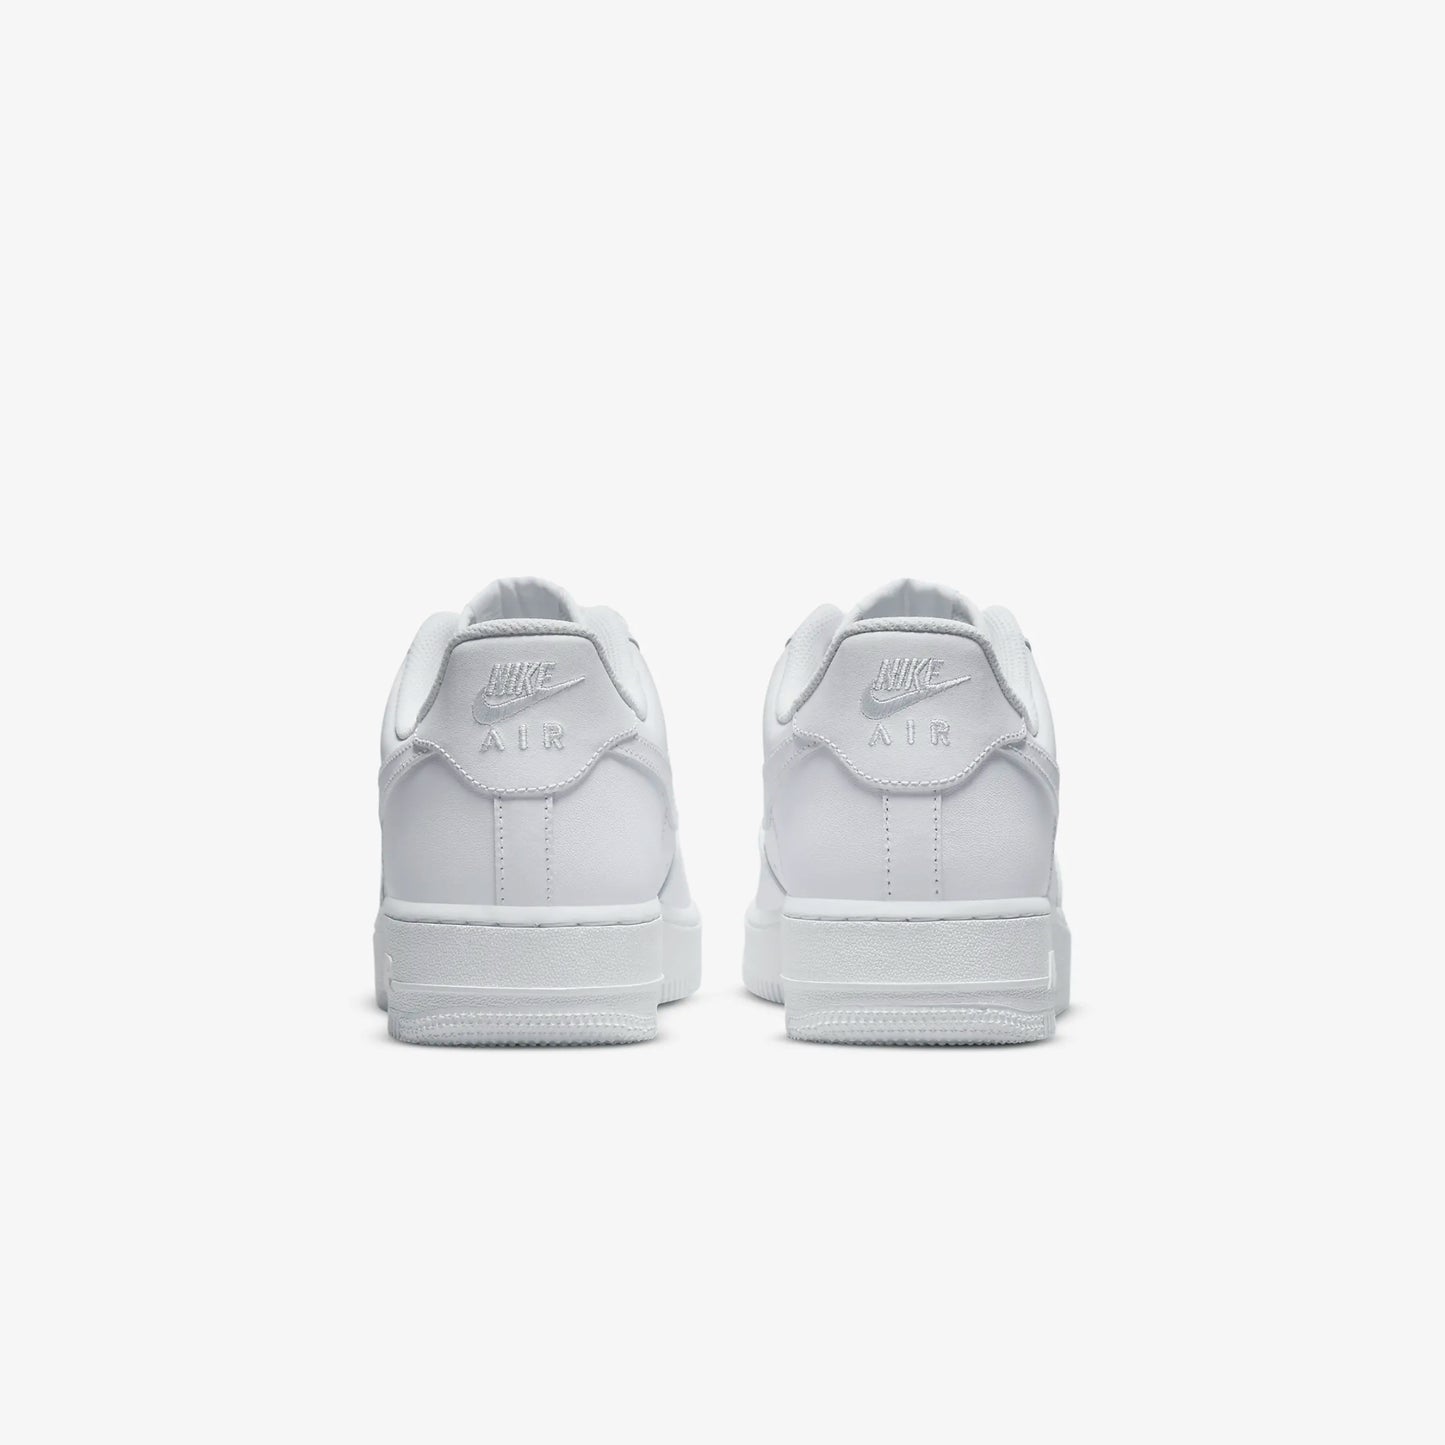 Nike Air Force 1 low Classic - White